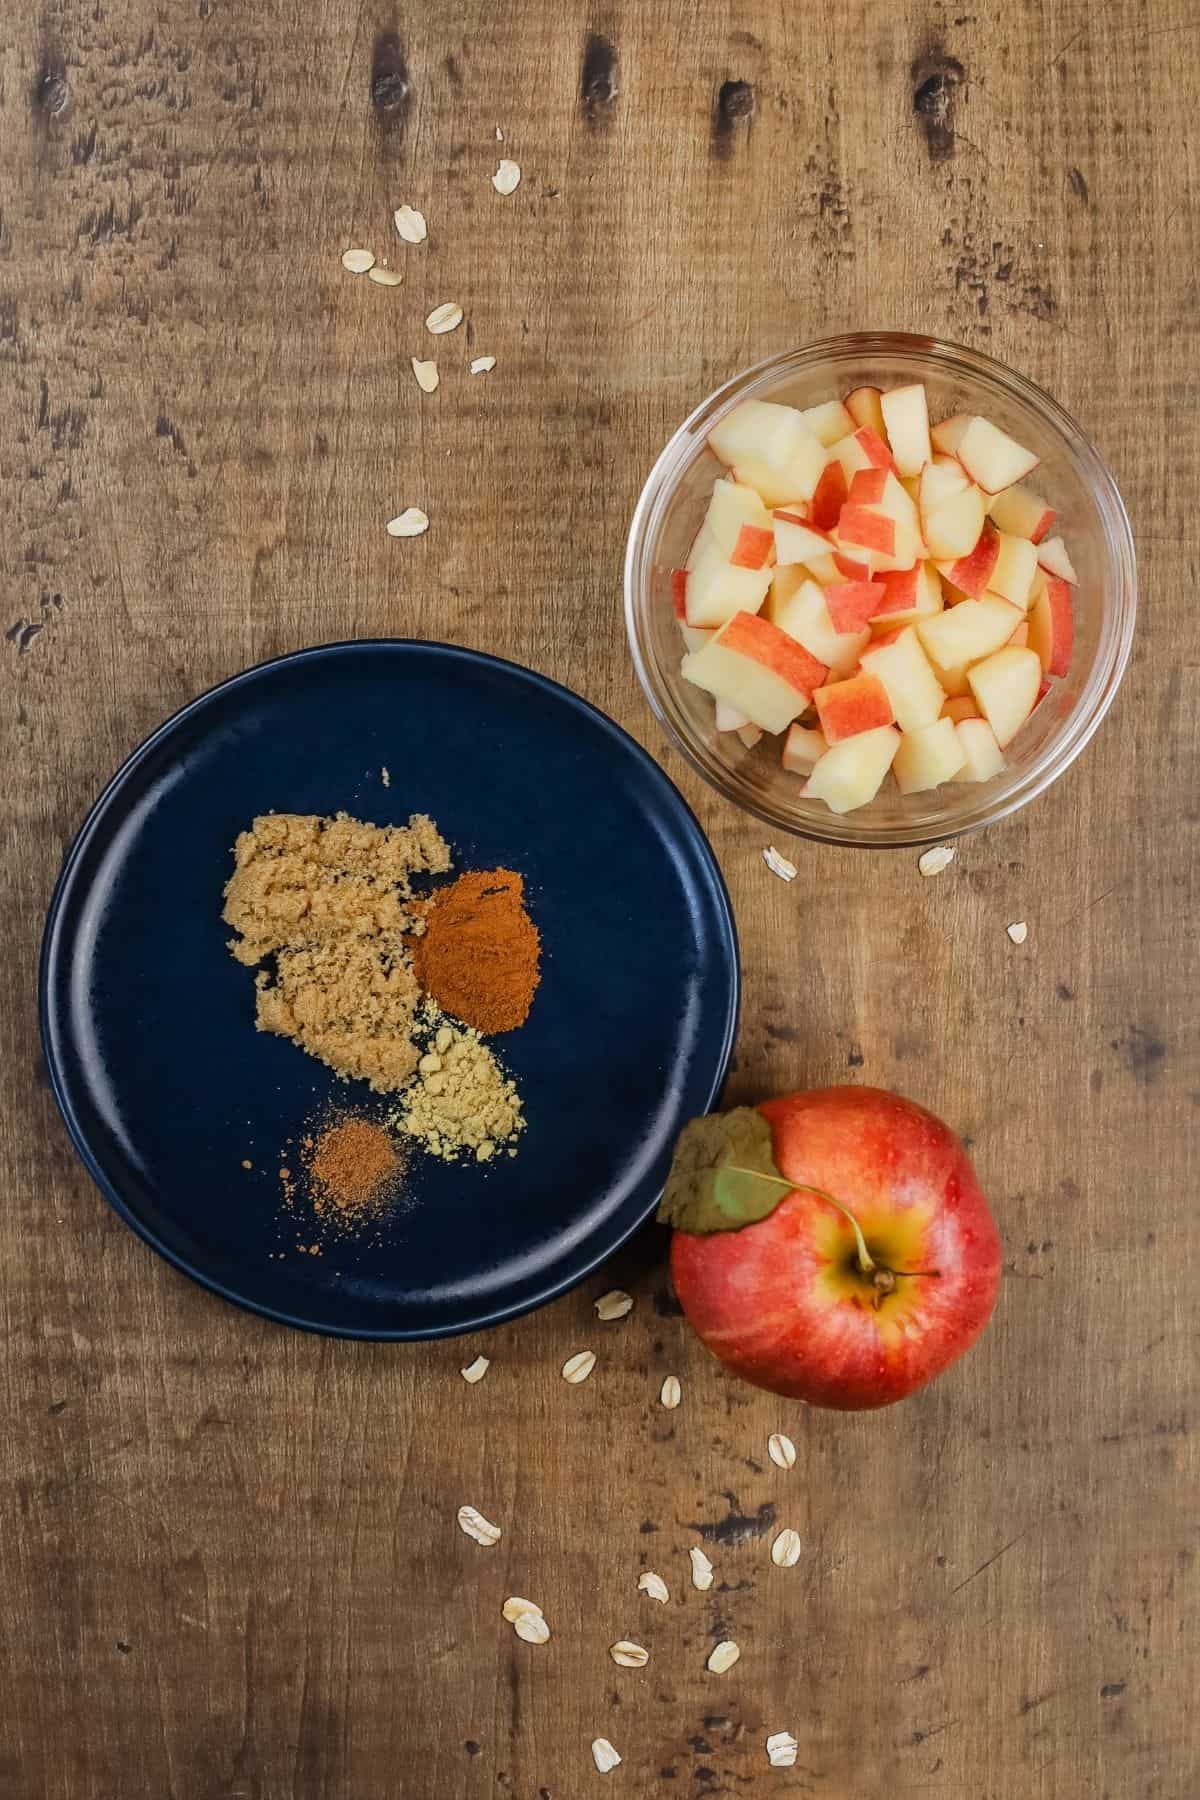 ingredients for apple overnight oats in various glass bowls on the wood table